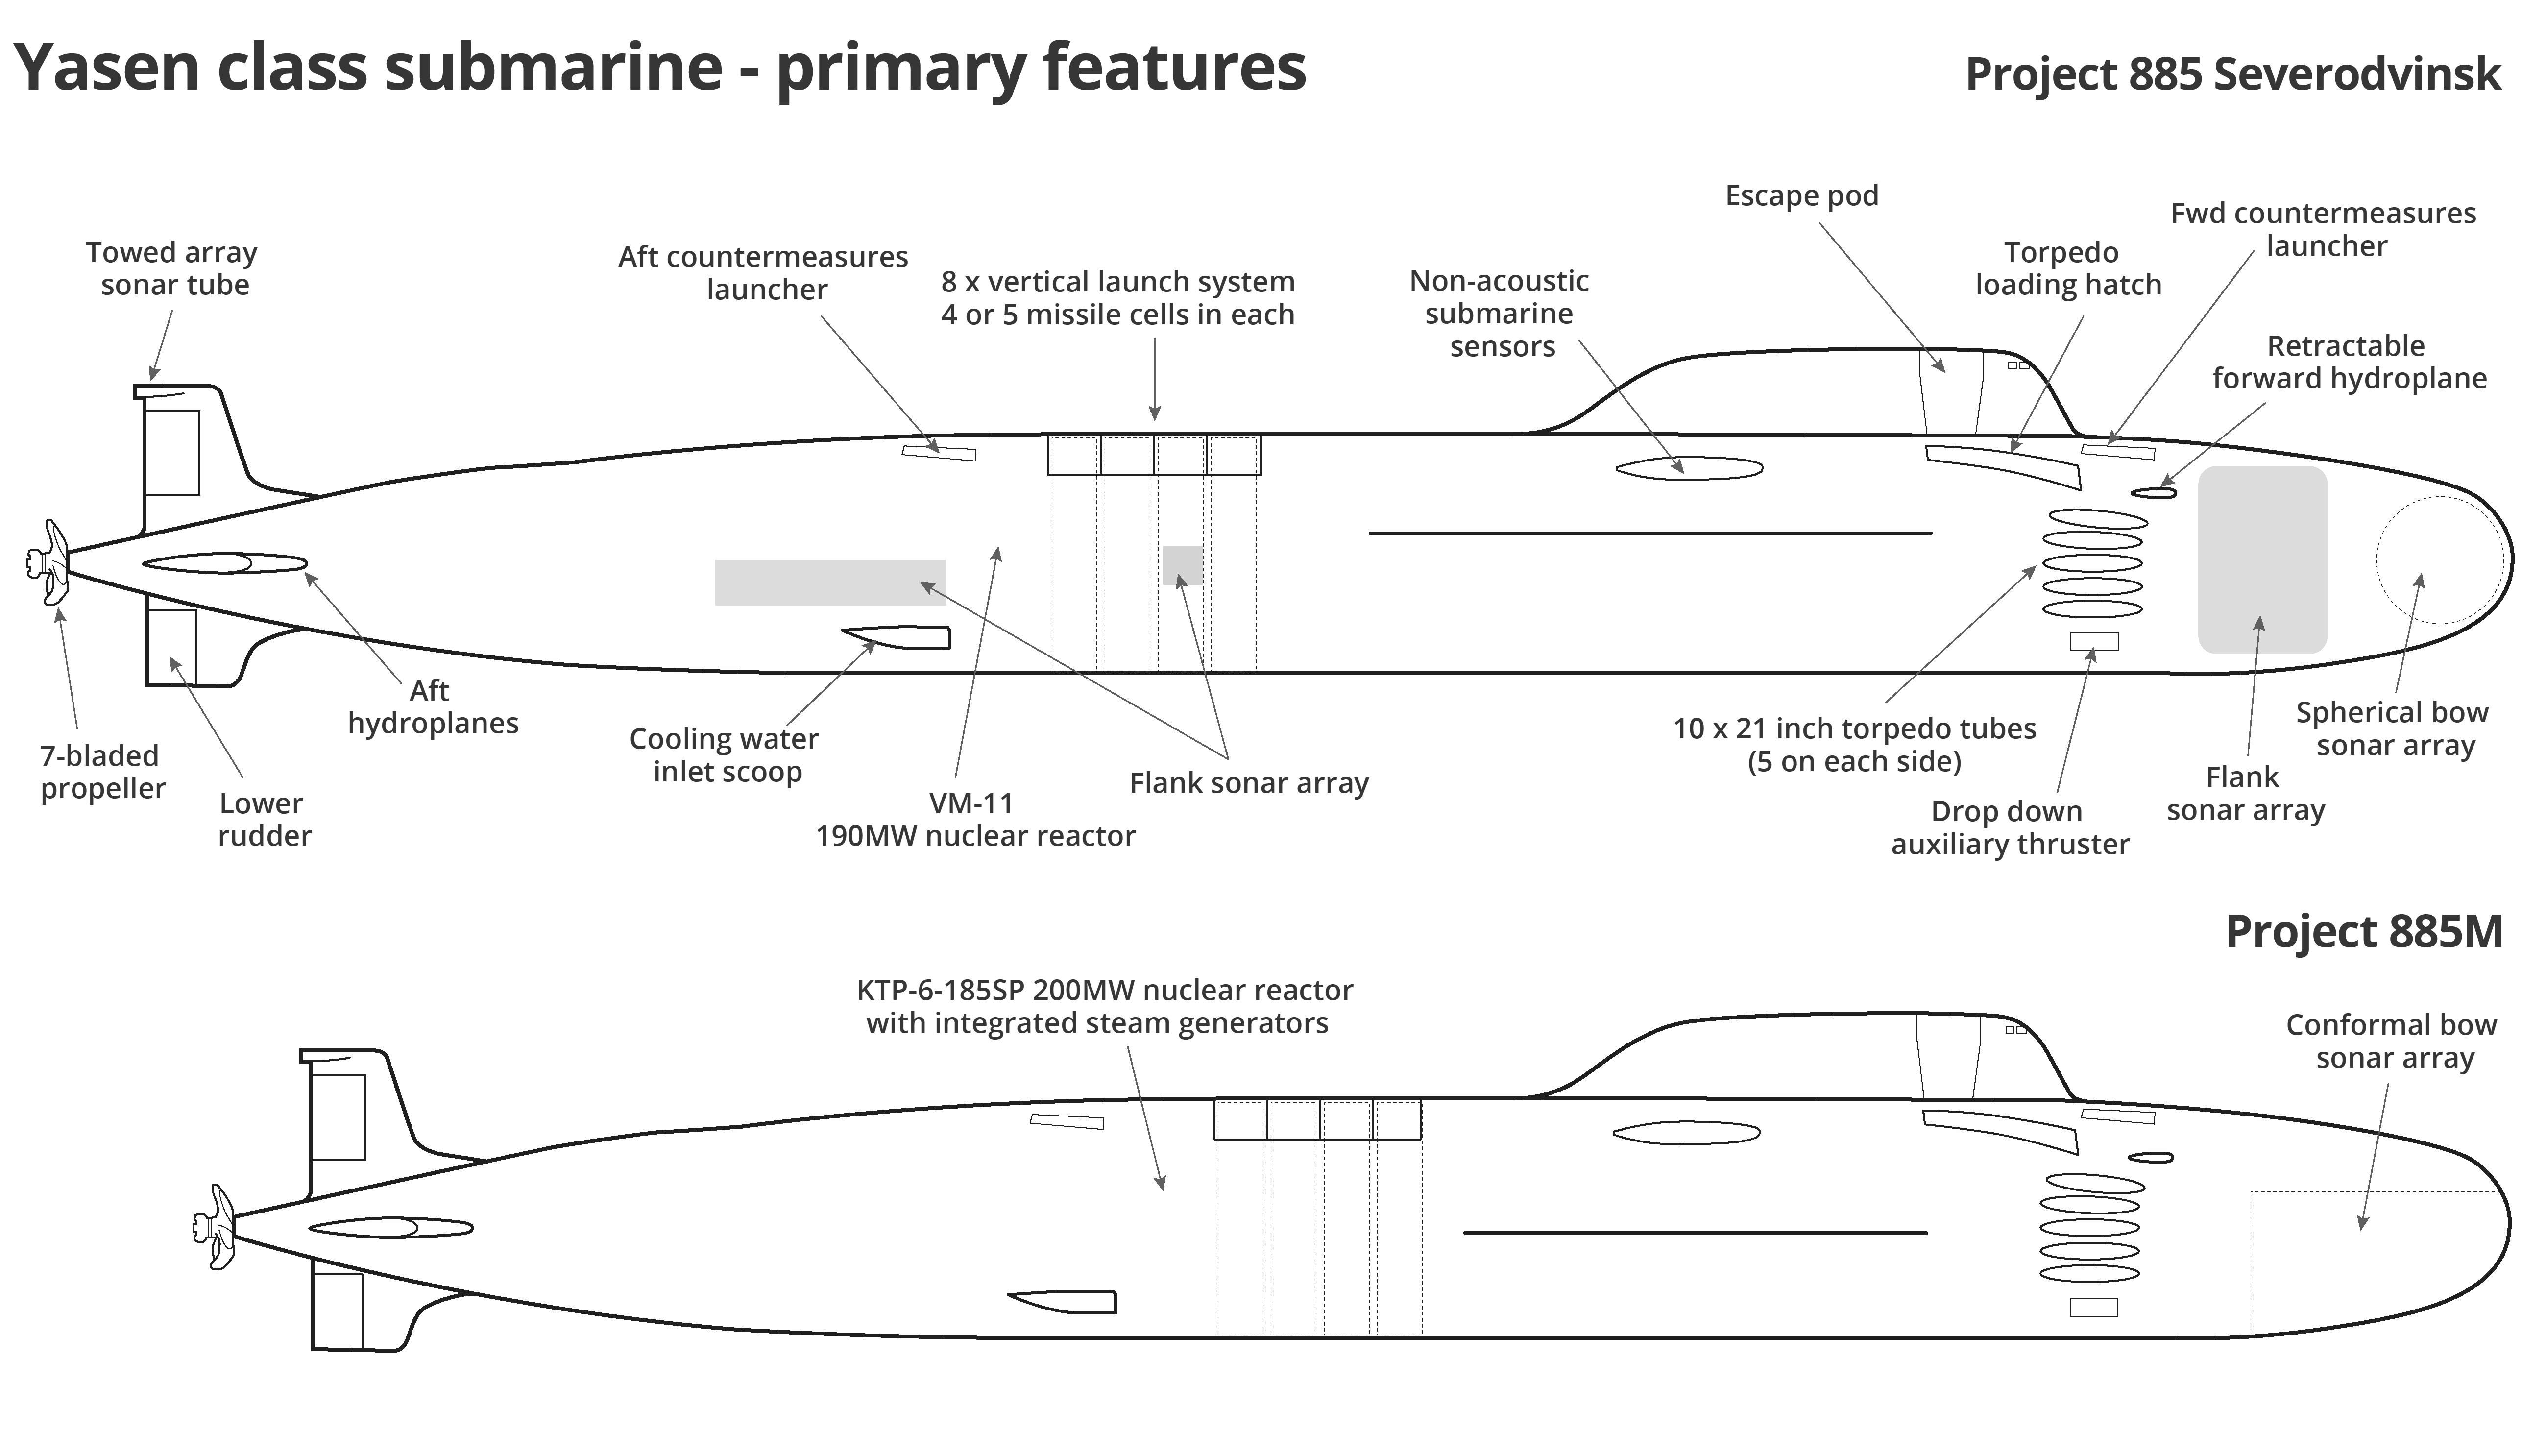 Russian-Yasen-class-submarines-primary-features.jpg